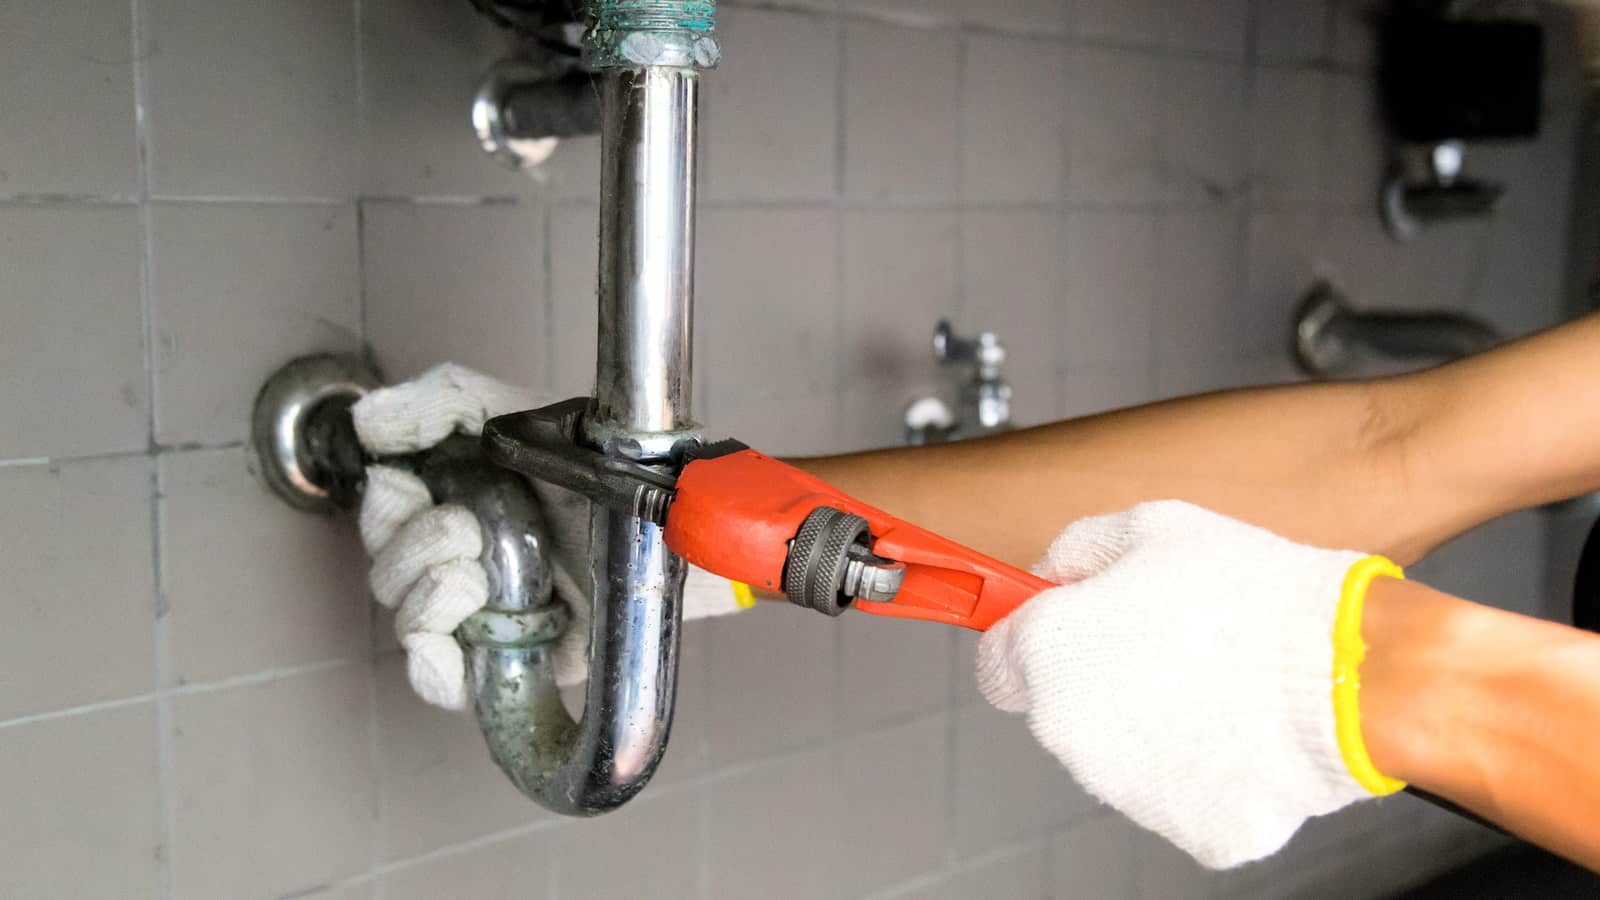 Roto Rooter Plumbing And Water Cleanup of Fullerton